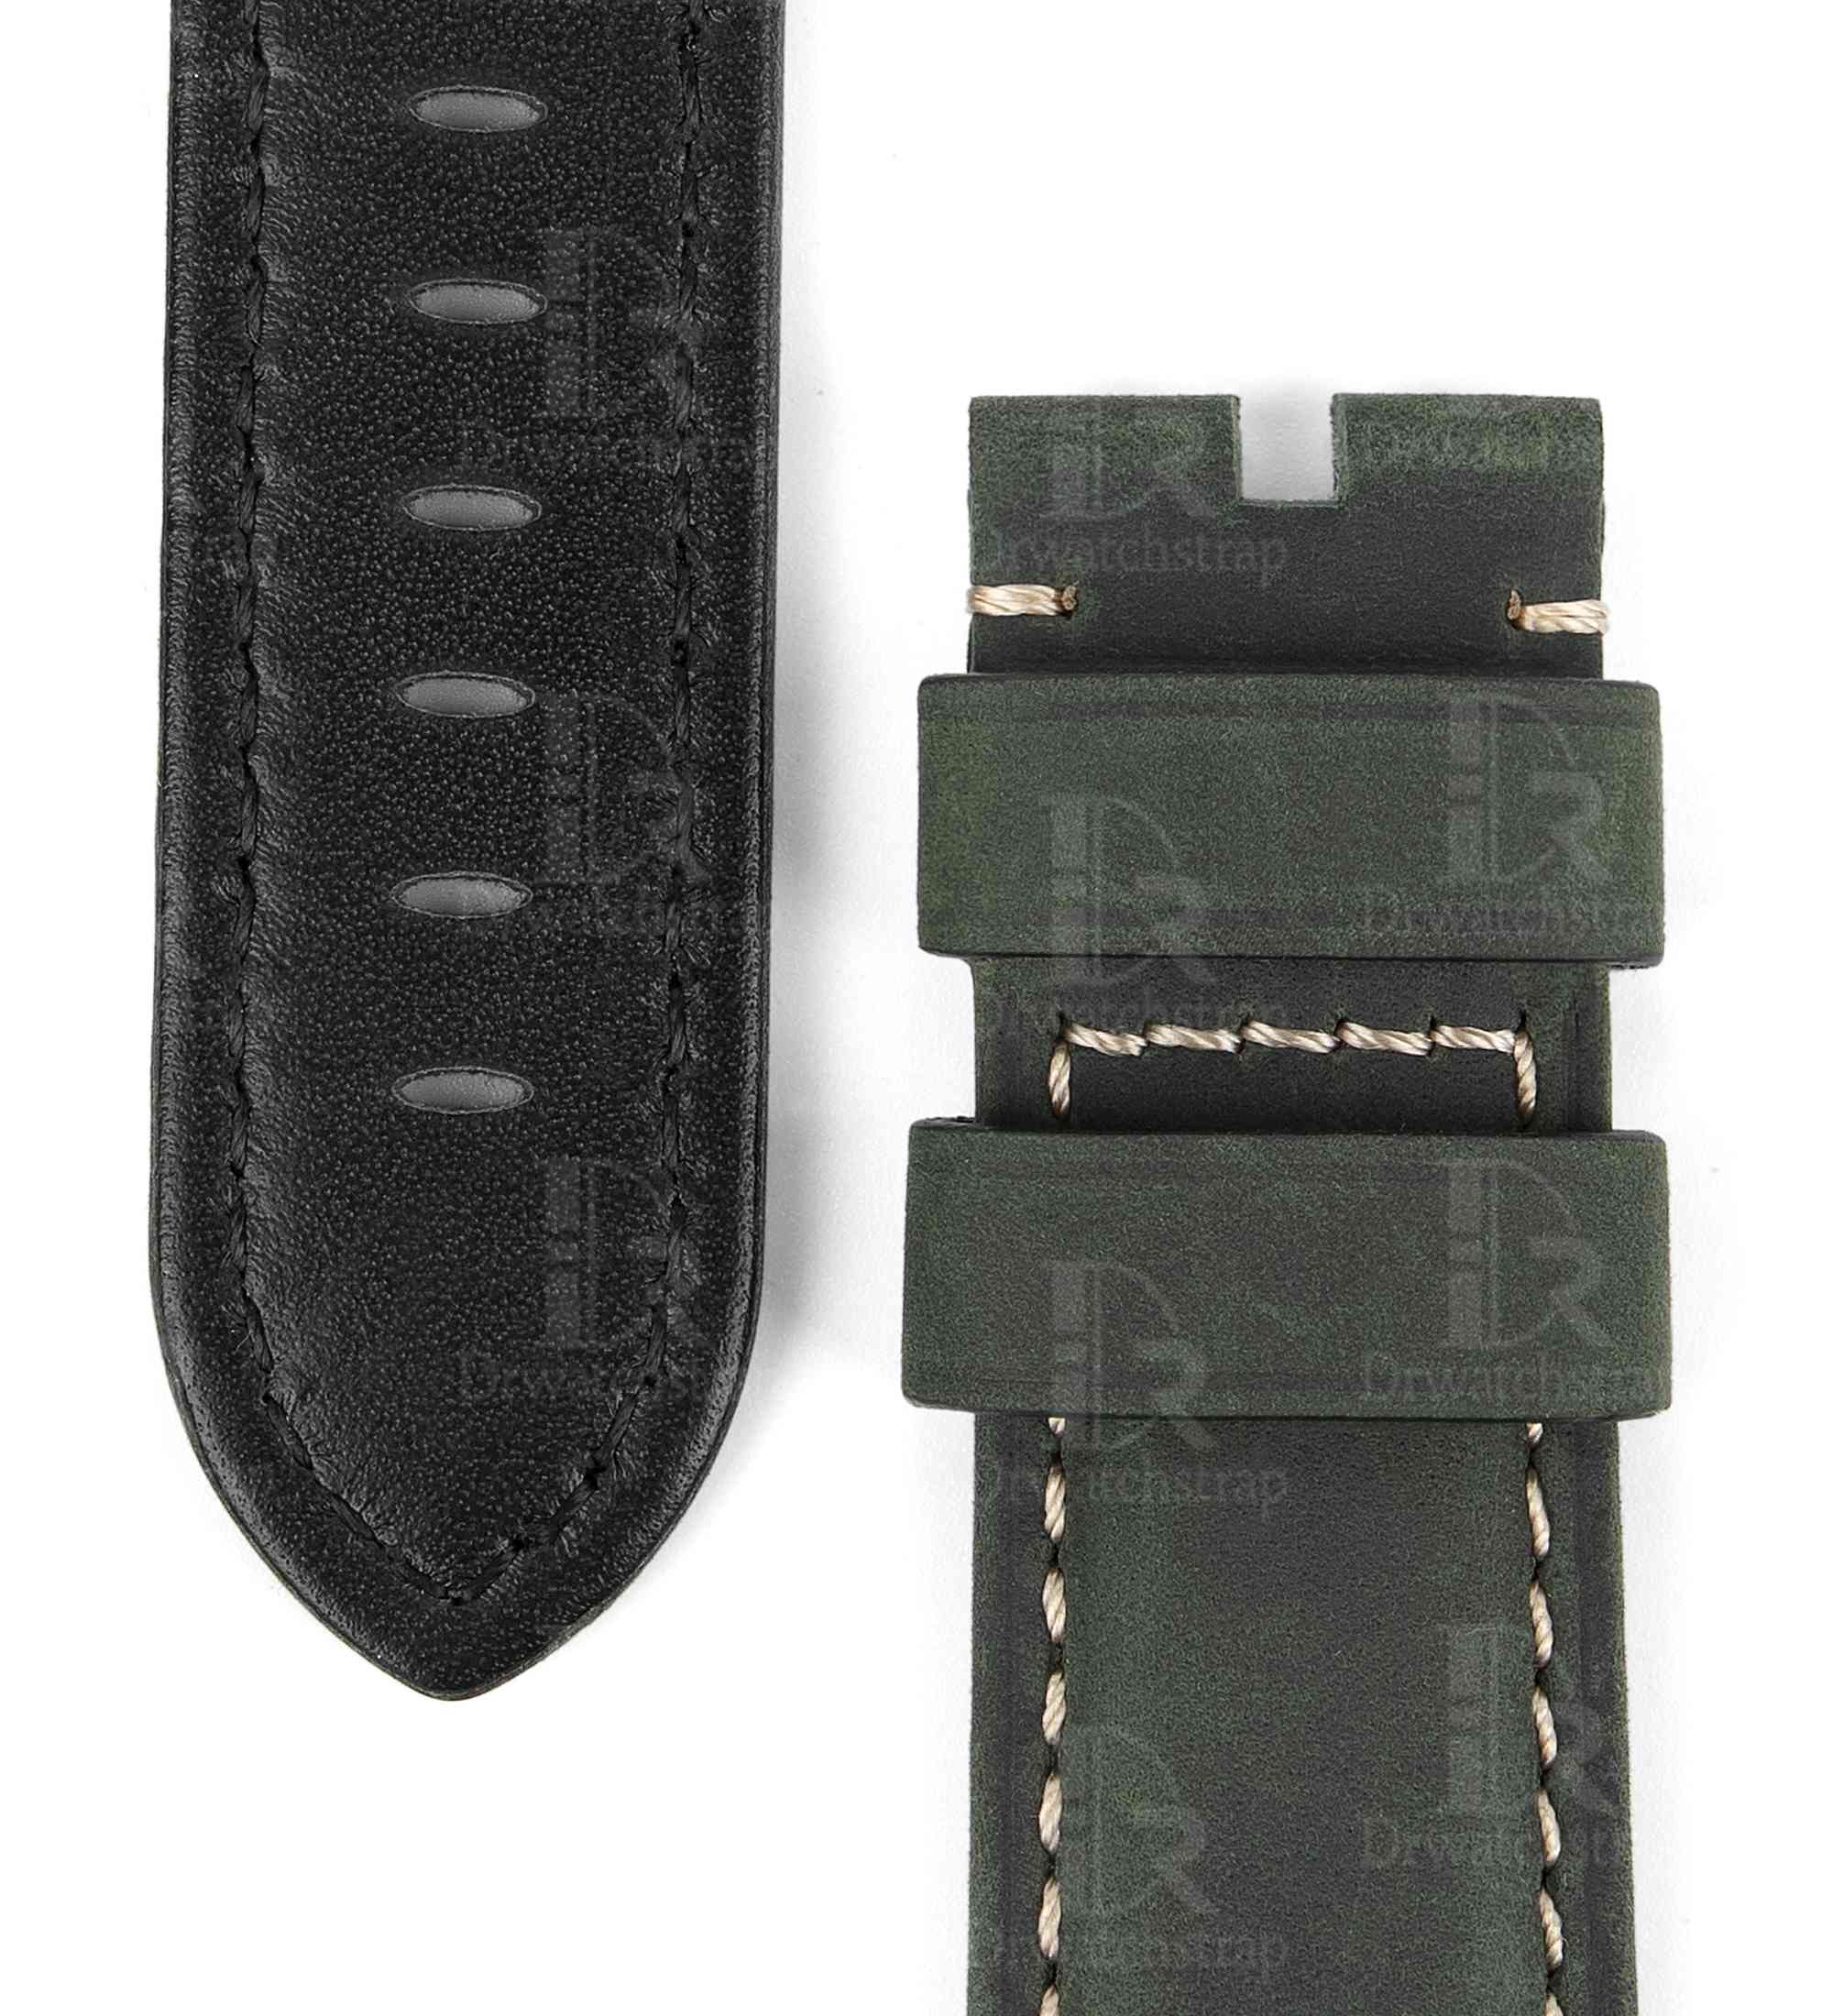 Custom aftermarket OEM best calfskin Oliver green Panerai leather watch straps & watch bands 22mm 24mm 26mm replacement for Panerai Luminor Marina, Radiomir, Submersible luxury watches - Shop the premium best calfskin material leather strap and watchband from Dr watchstrap at a low price